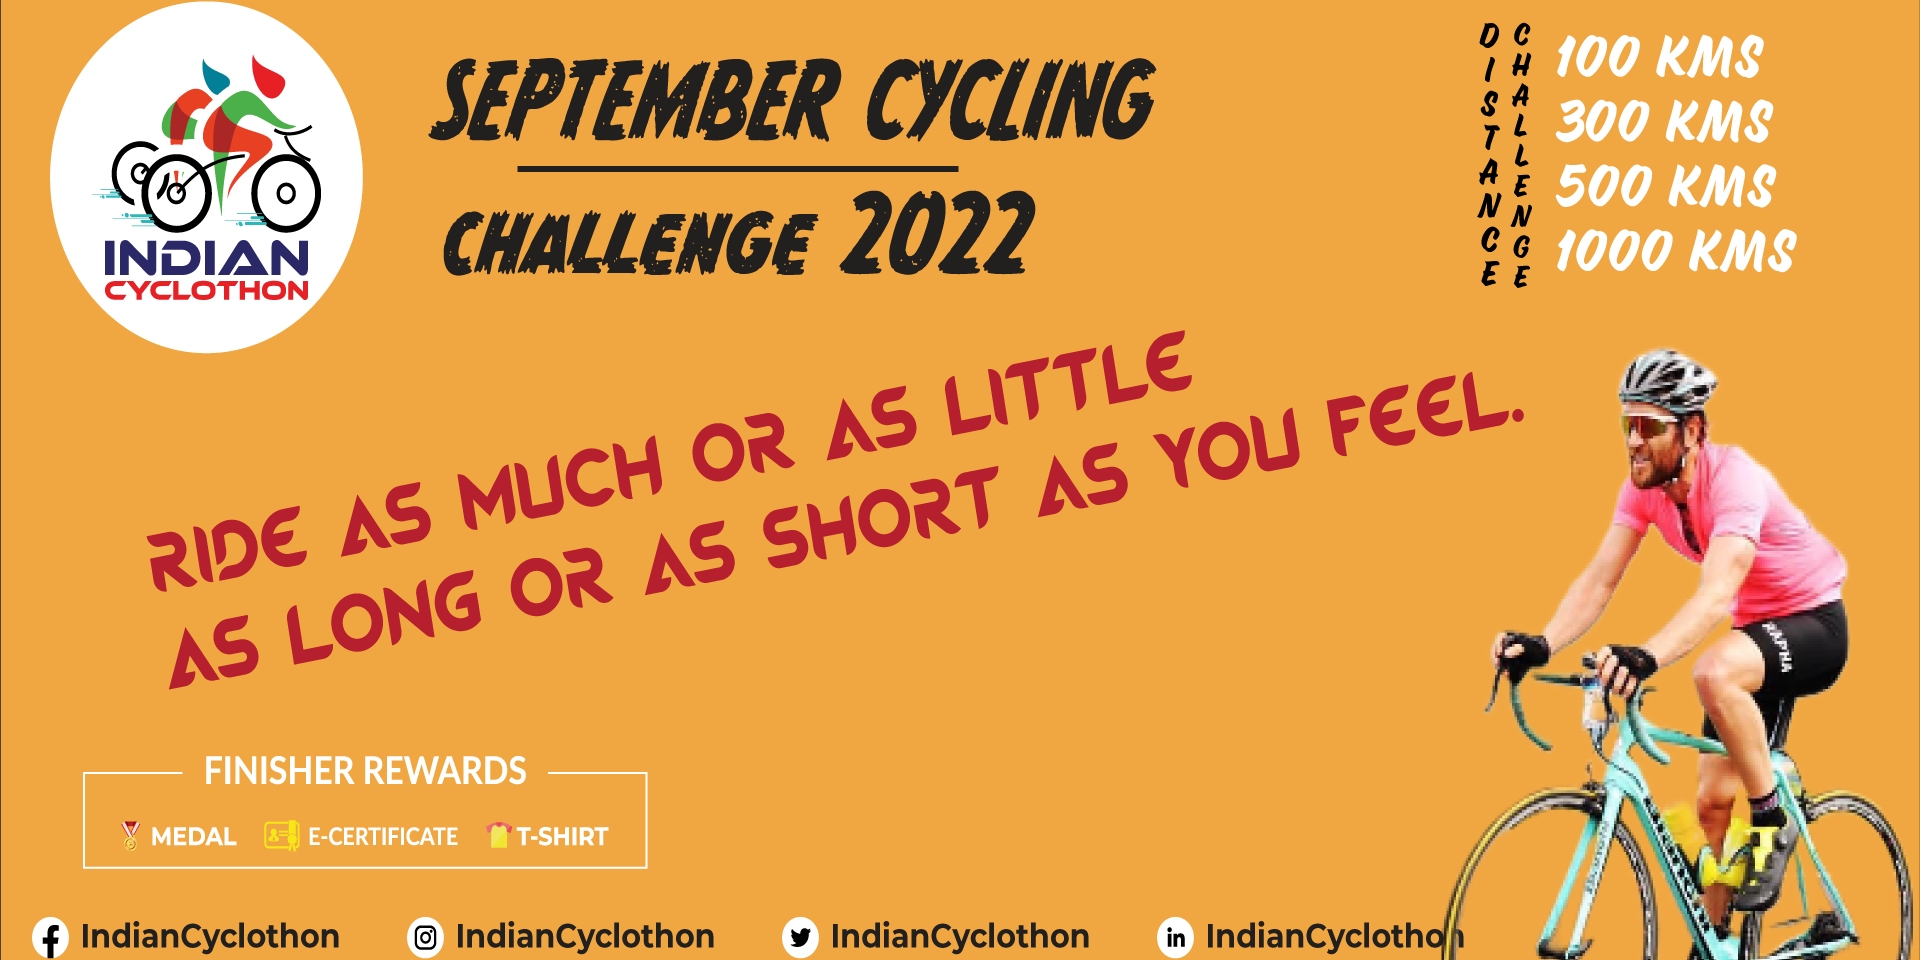 September Cycling Challenge 2022 image